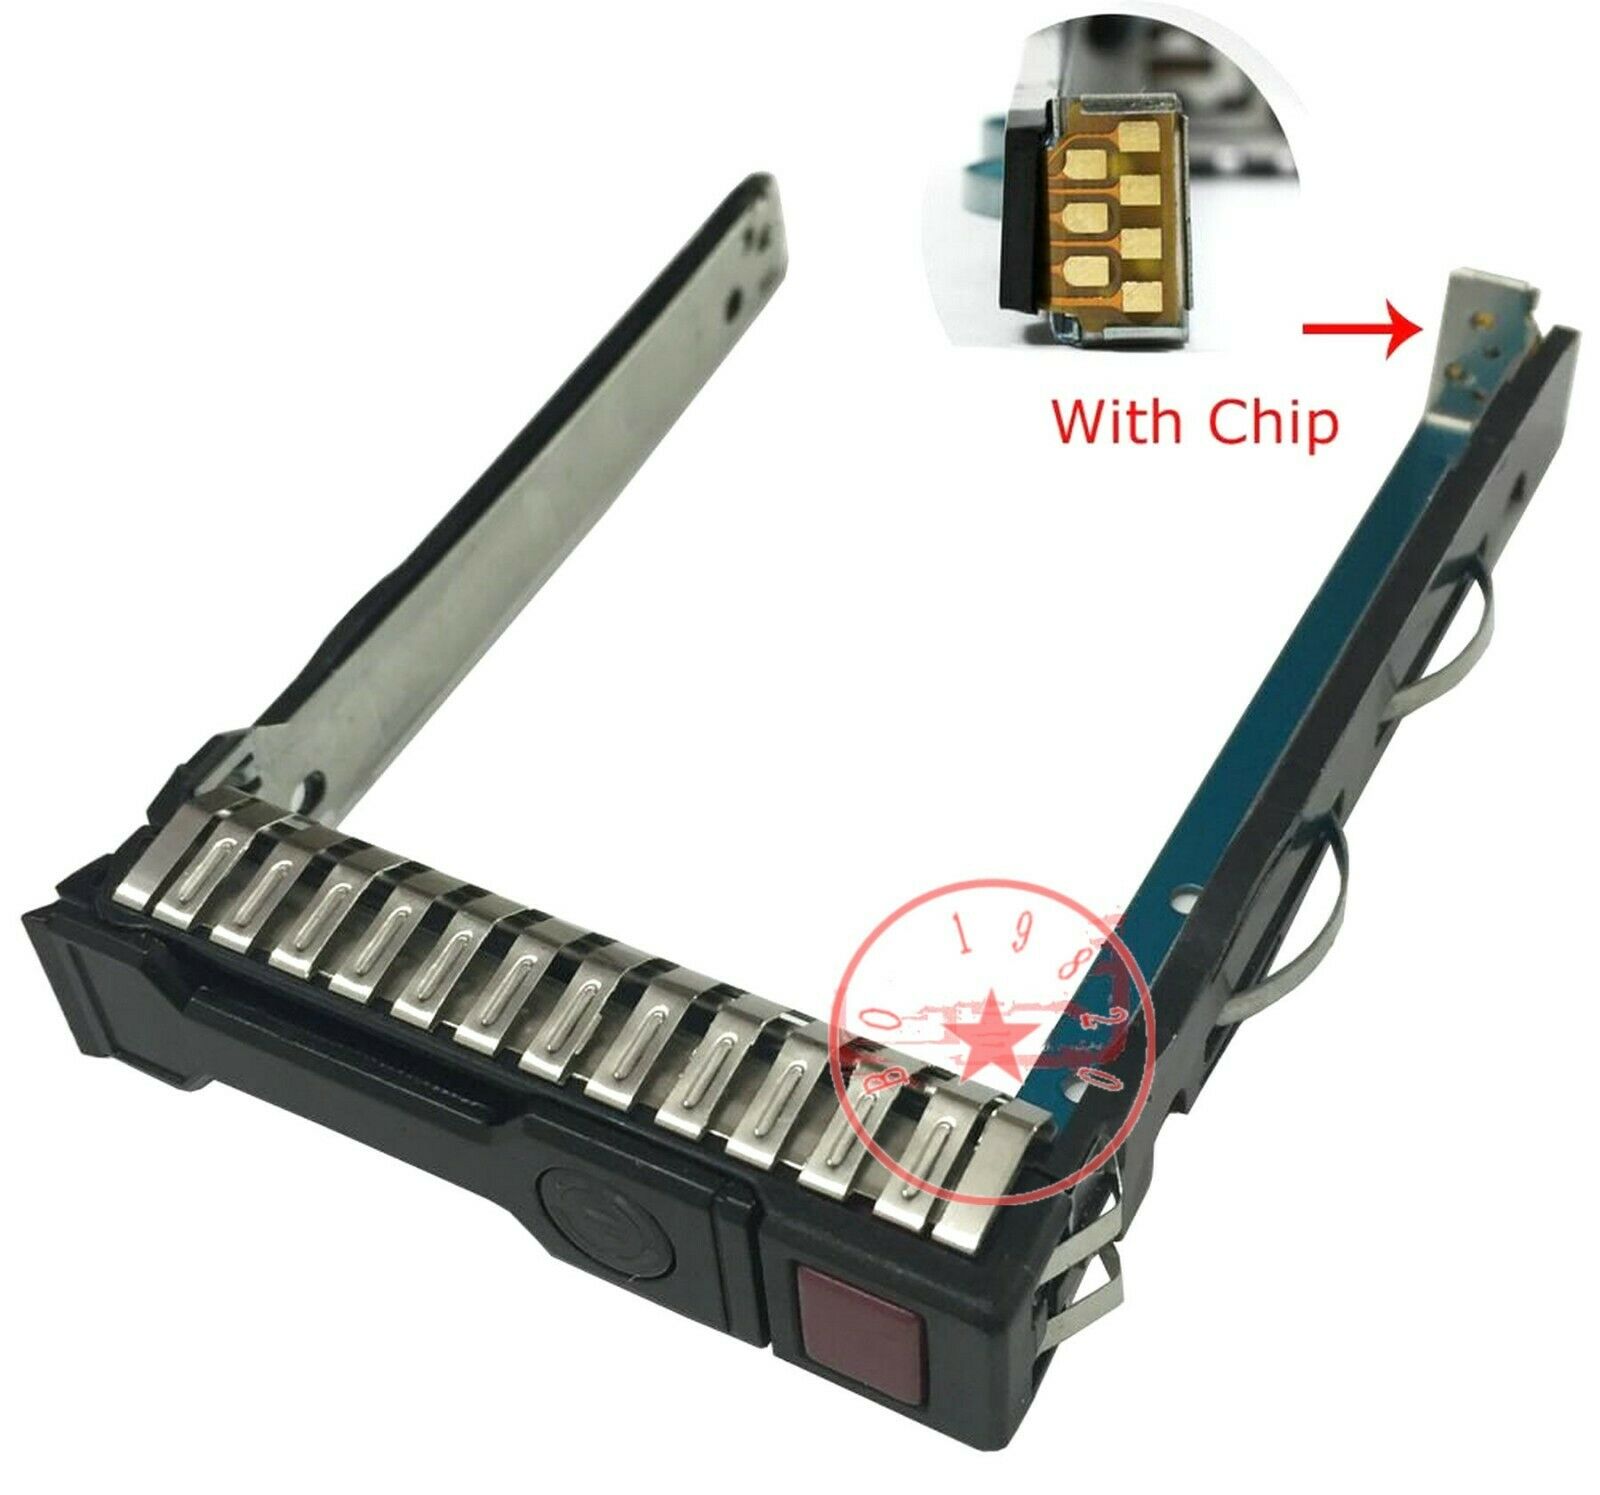 651687-001 2.5 Inch Hard Disk Drive Bracket Hdd Caddy Tray For Hp G8 G9 Server